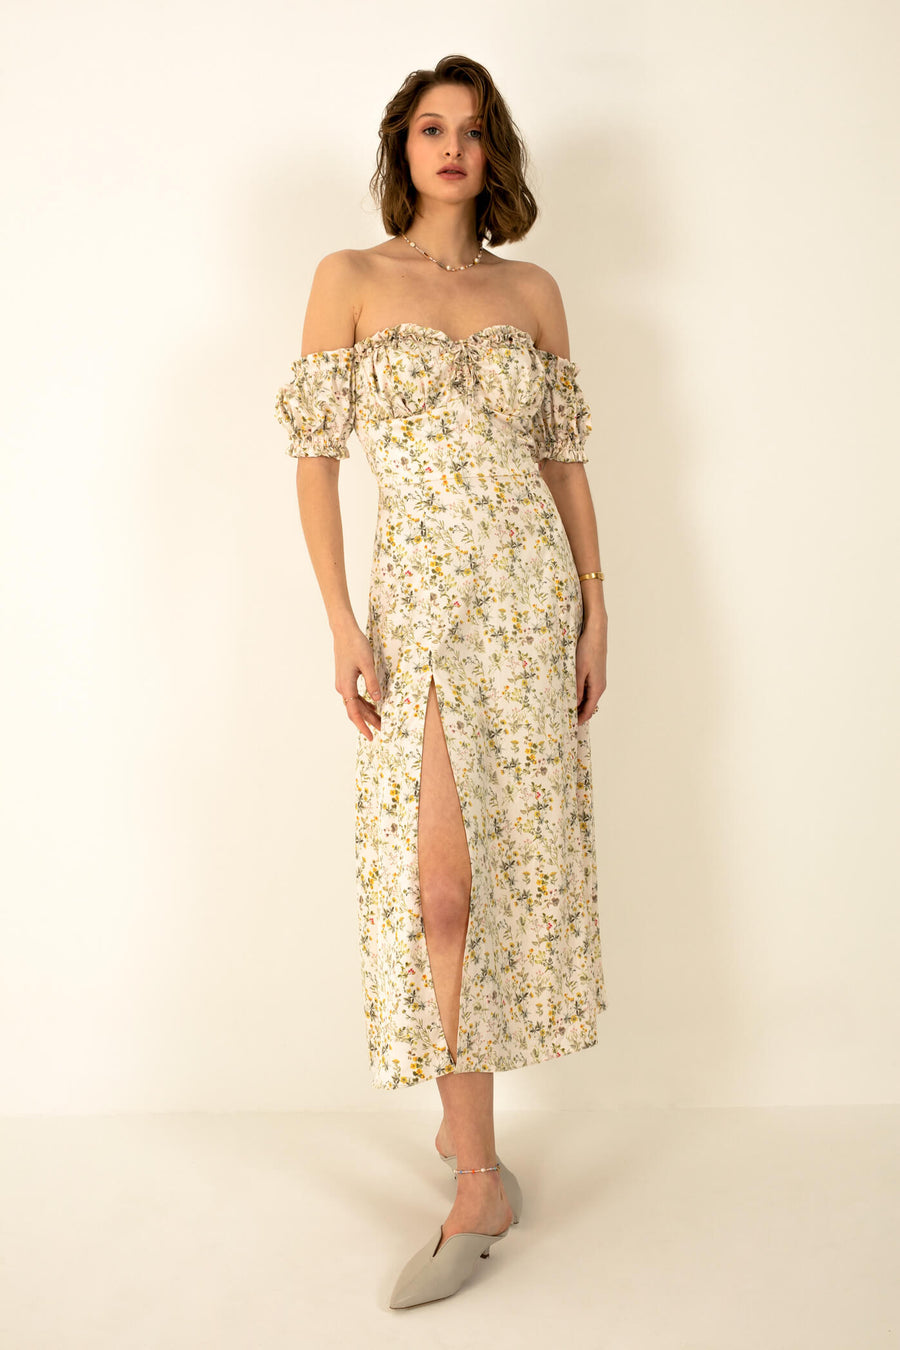 Feeling #1 midi dress with a floral print. Muse